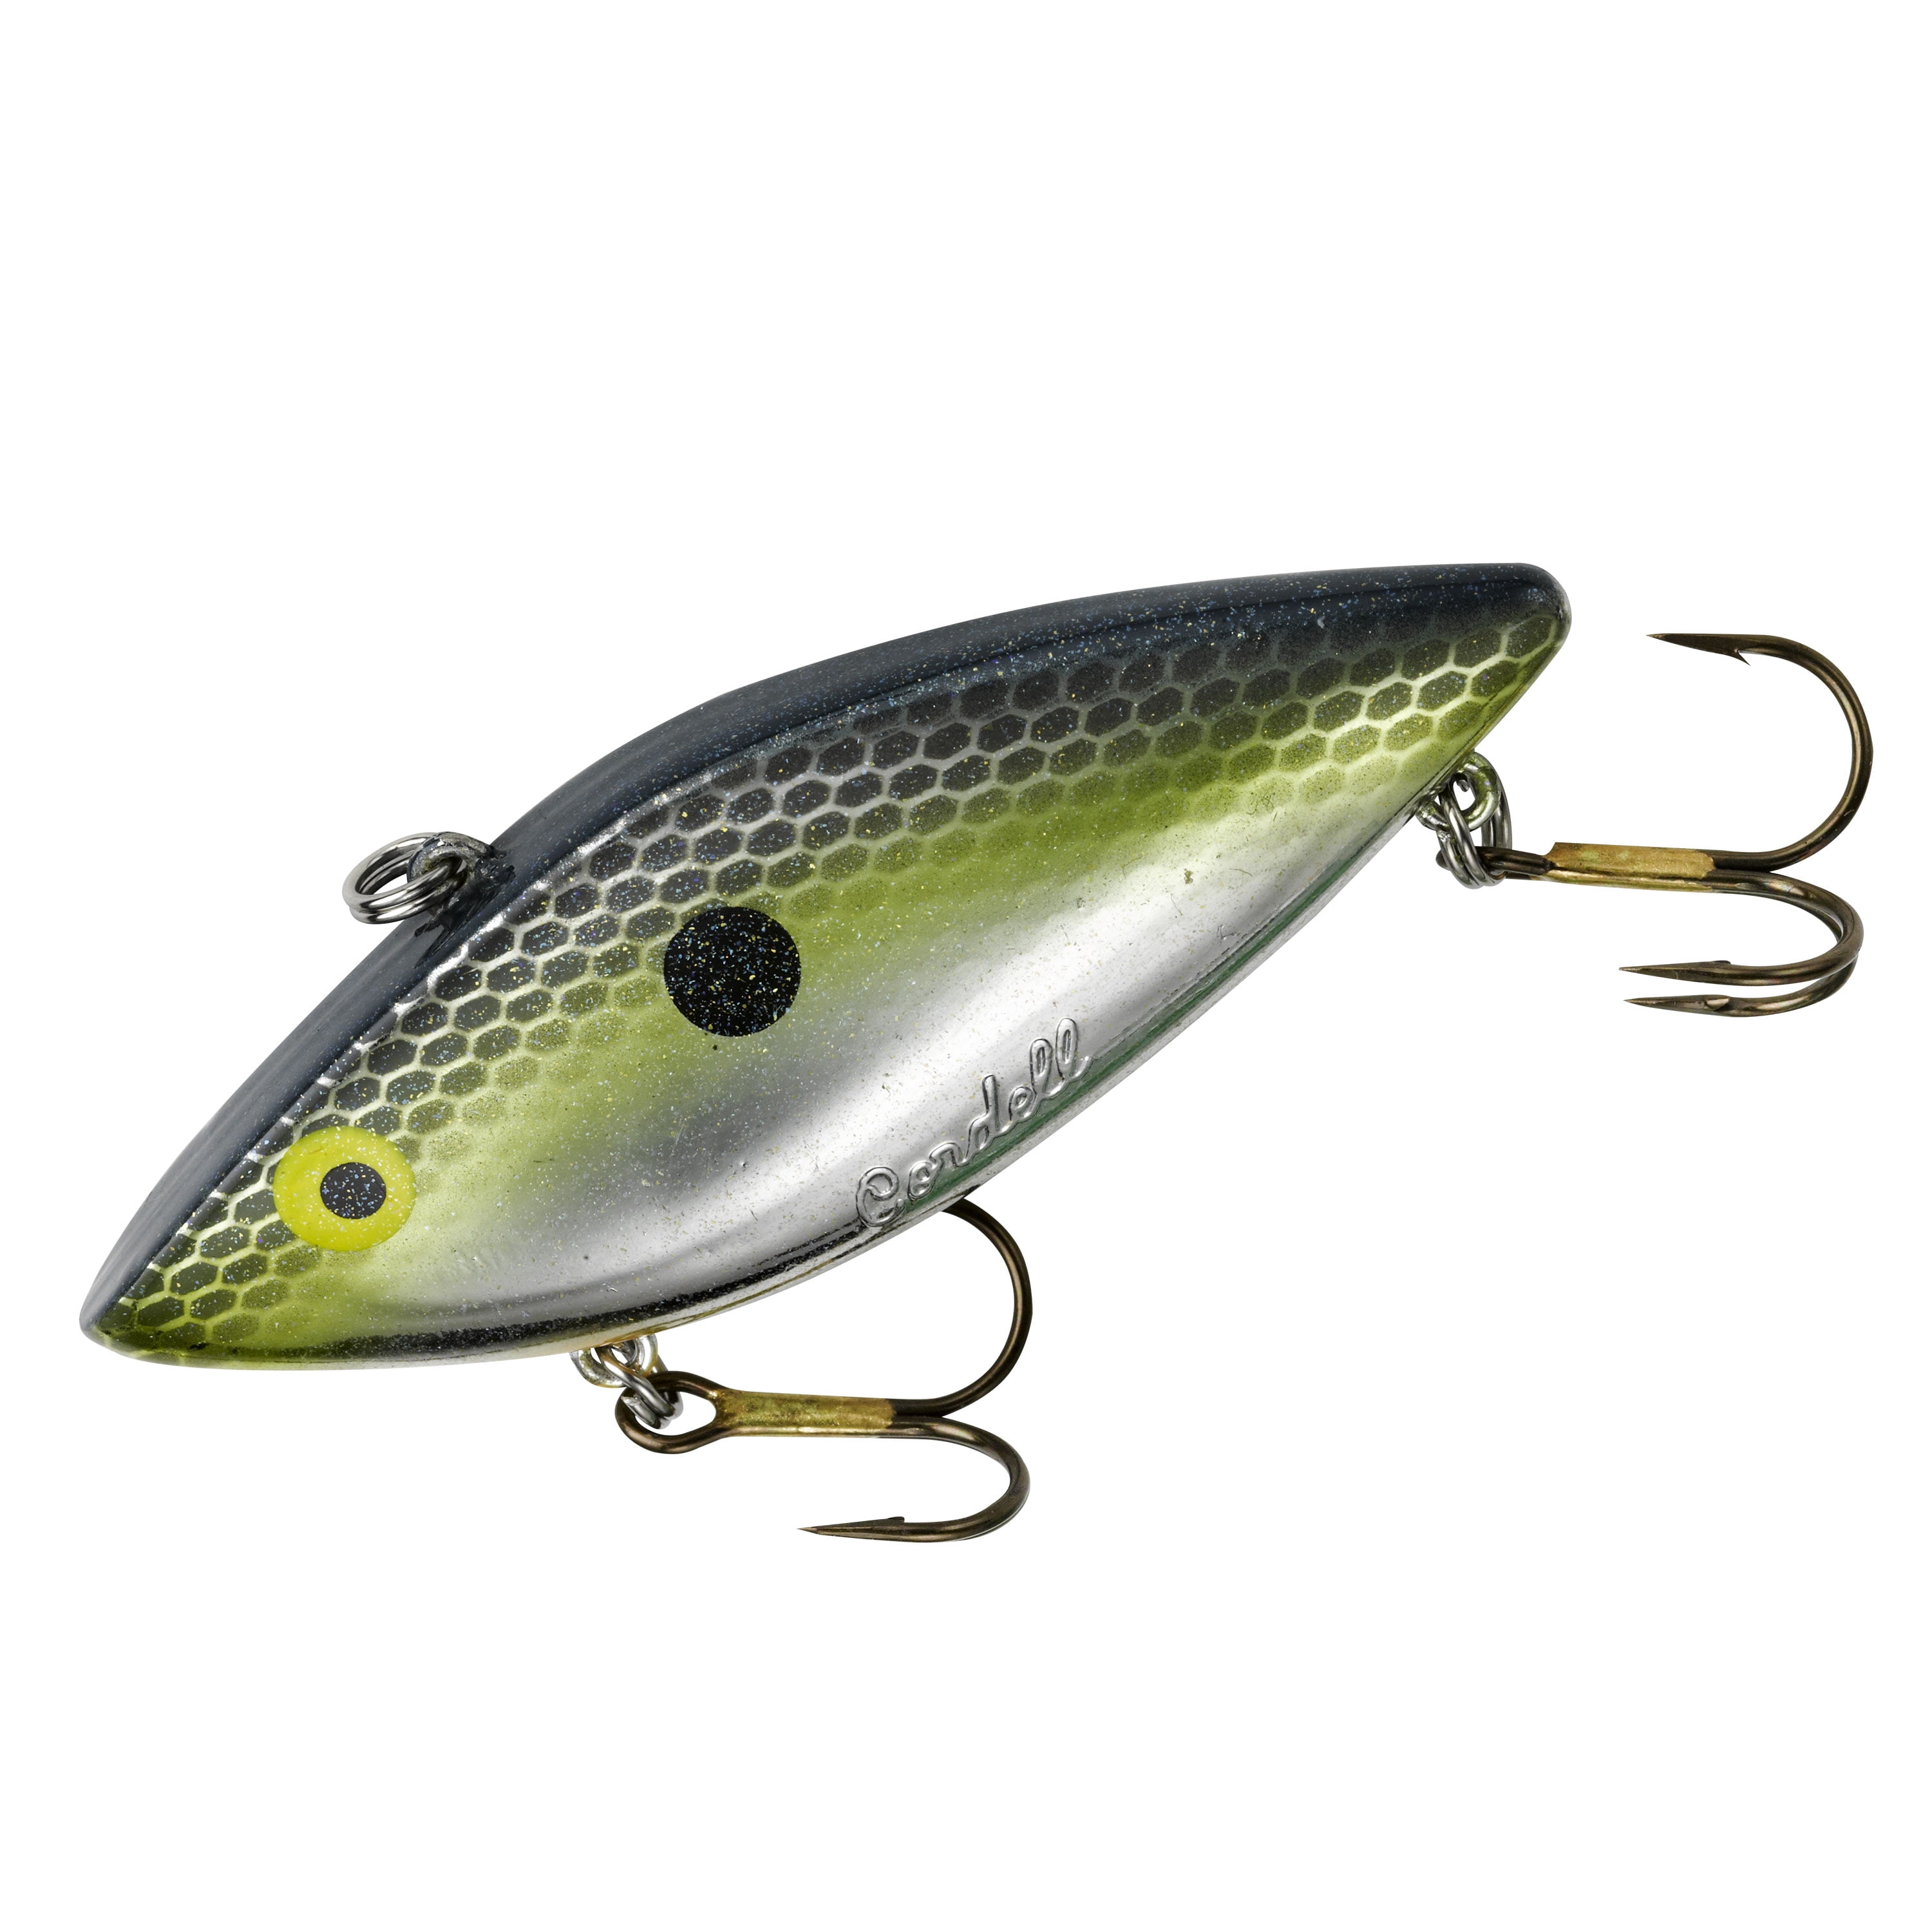  Cotton Cordell Super Spot Fishing Lures, Royal Chrome,  2.5-Inch : Fishing Topwater Lures And Crankbaits : Sports & Outdoors